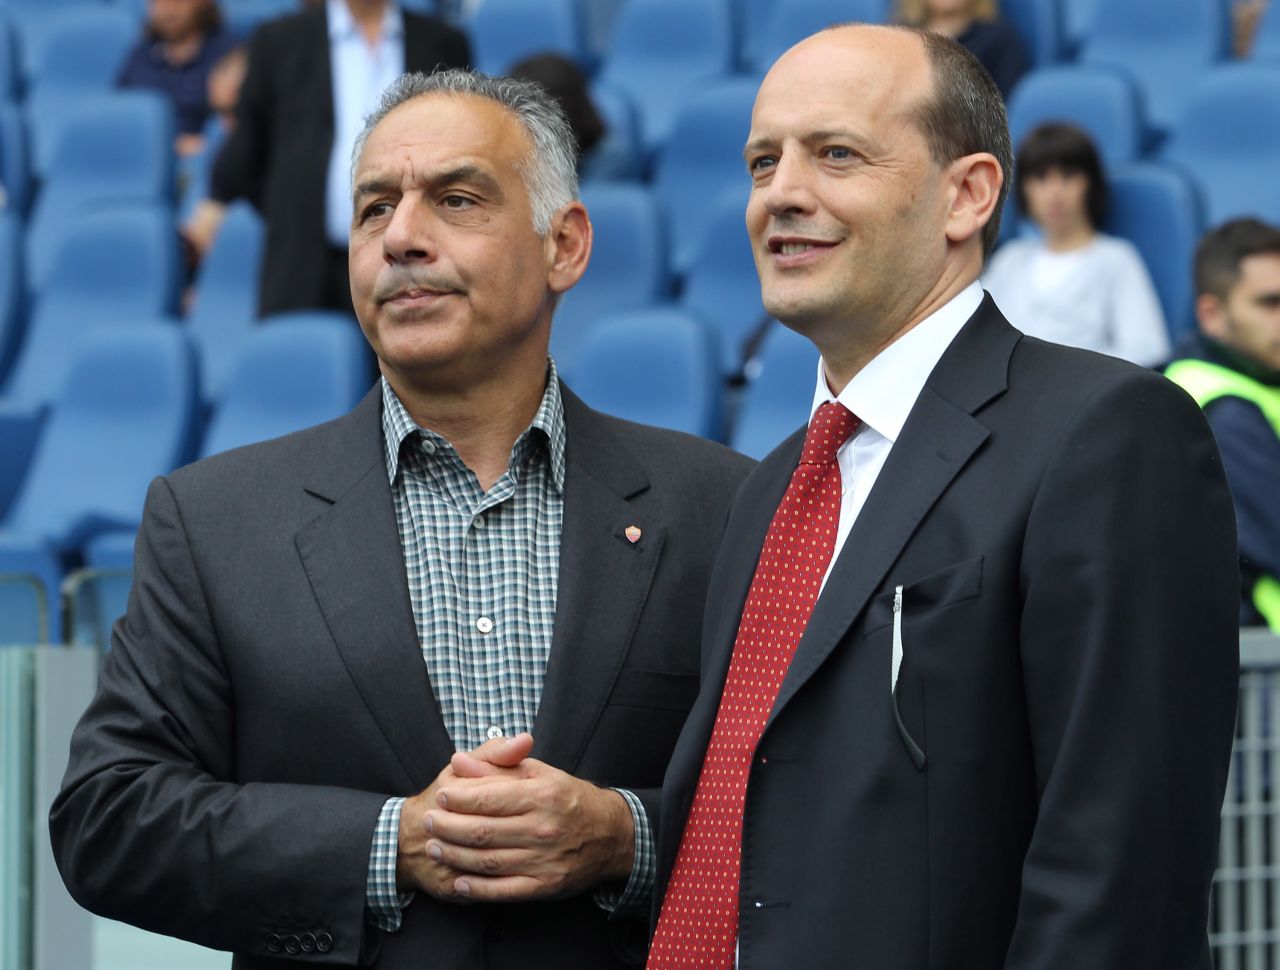 American-born Pallotta (left) has been in charge at the Italian giant since 2013.